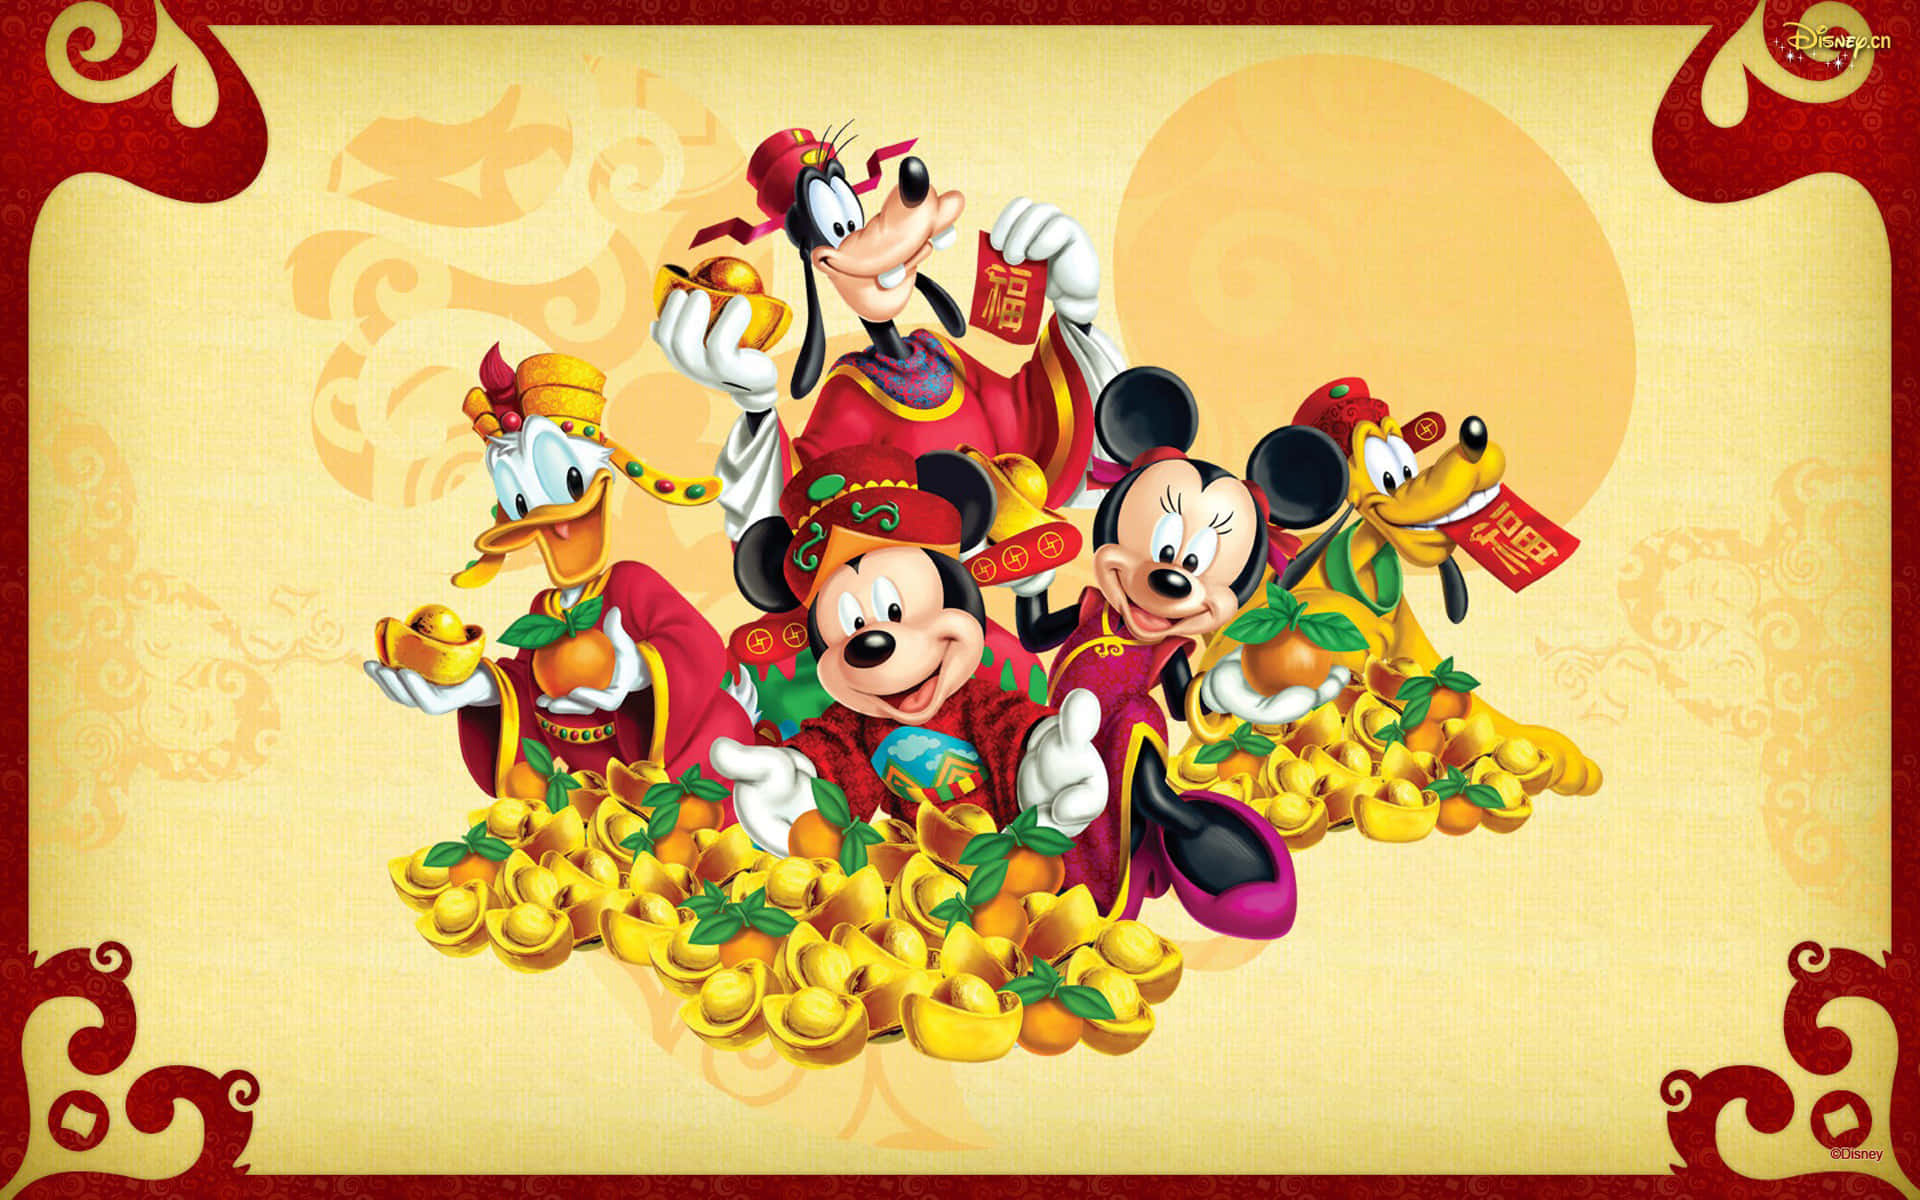 Celebrate Mickey's New Year with Joy Wallpaper